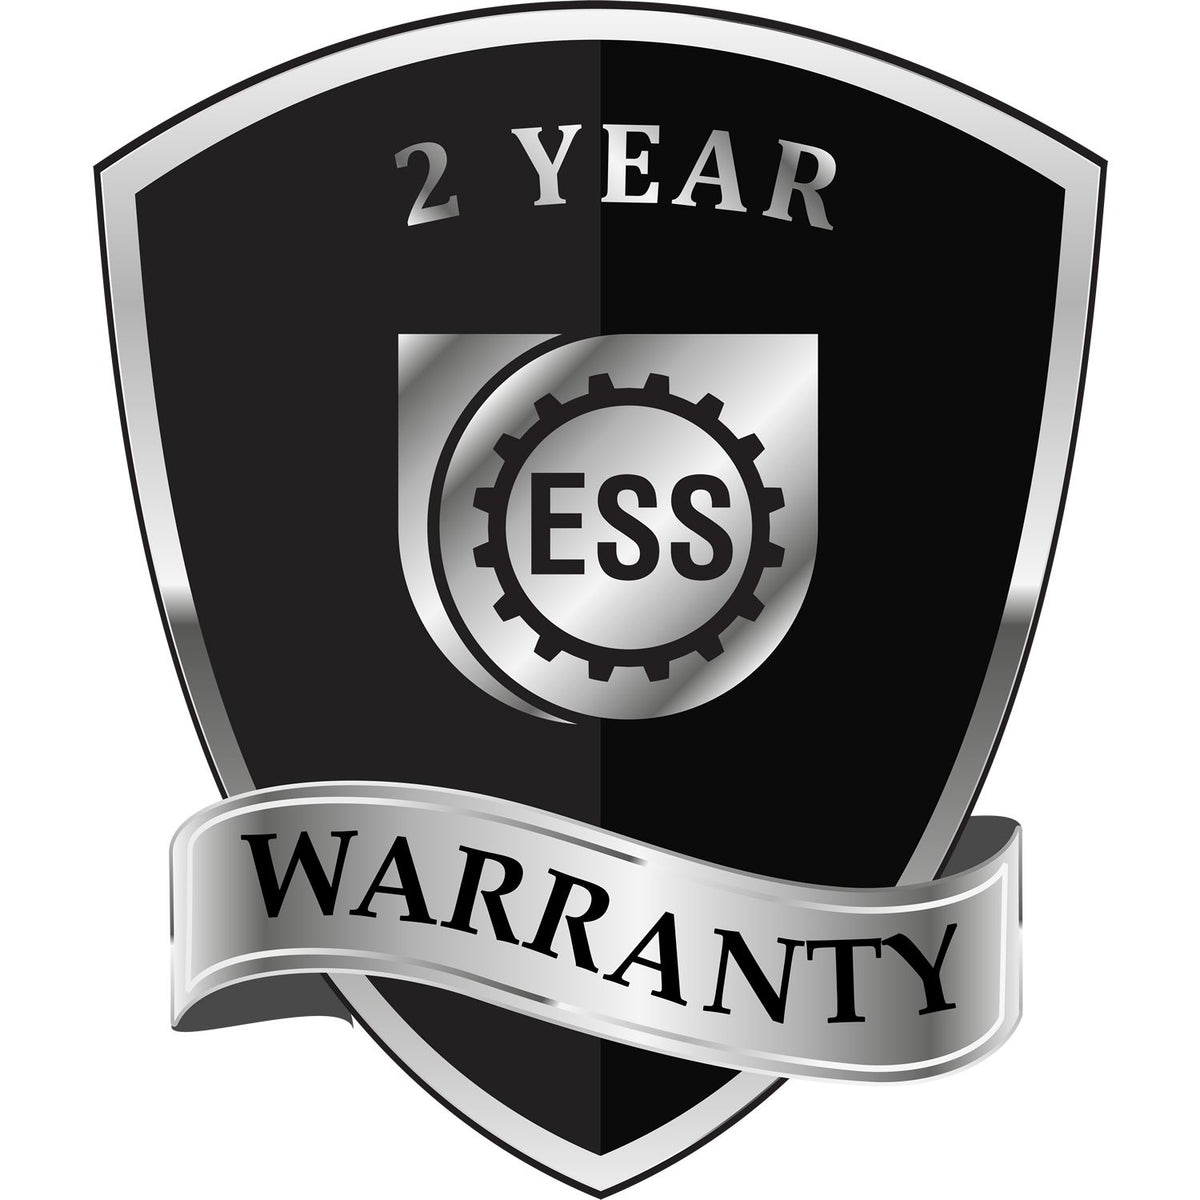 A badge or emblem showing a warranty icon for the Extended Long Reach Iowa Surveyor Embosser